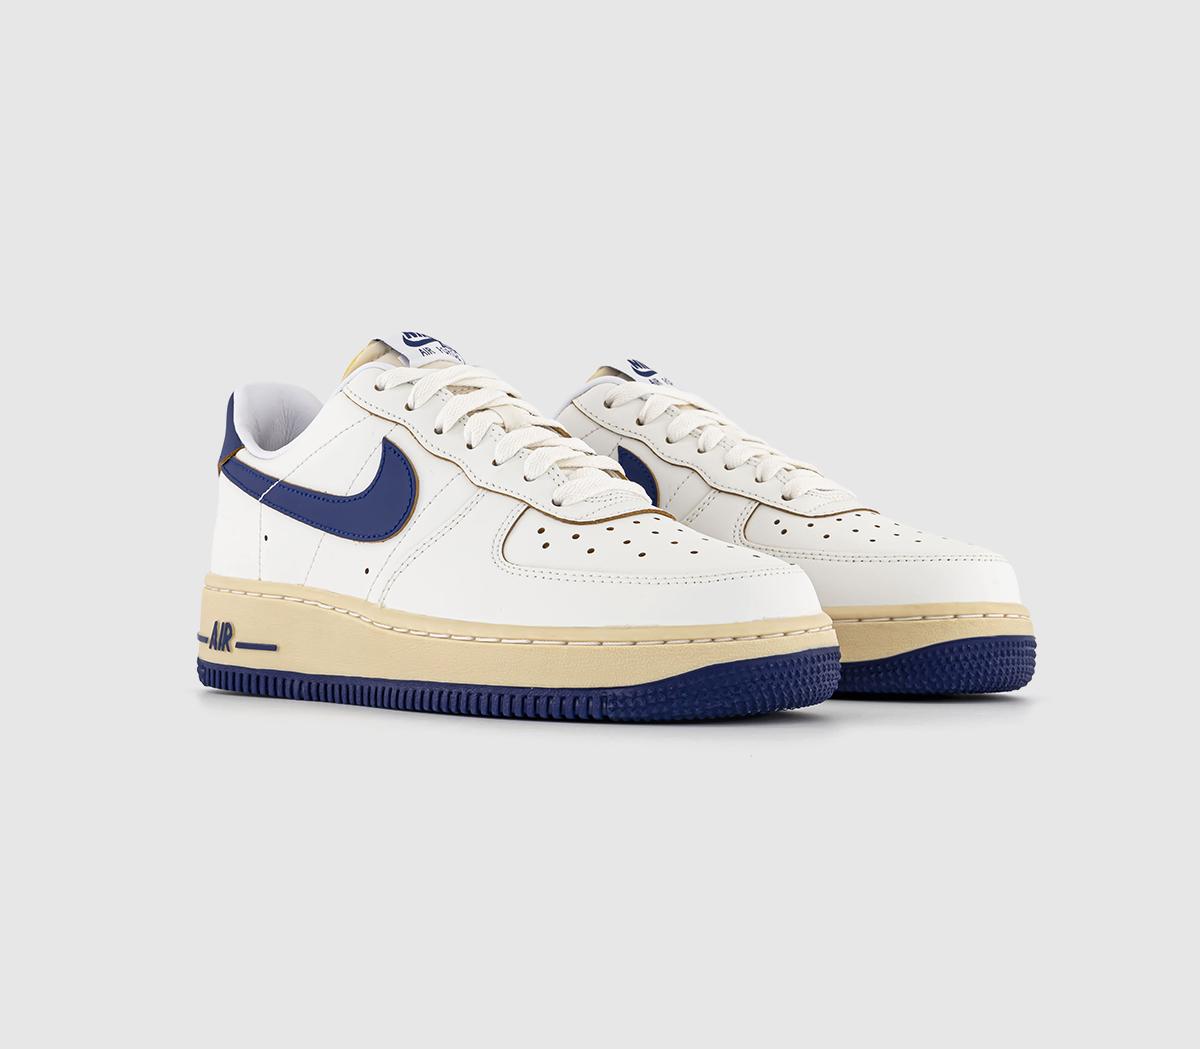 Nike Womens Air Force 1 07 Trainers Sail Deep Royal Blue Pale Vanilla Gold Suede White, 3